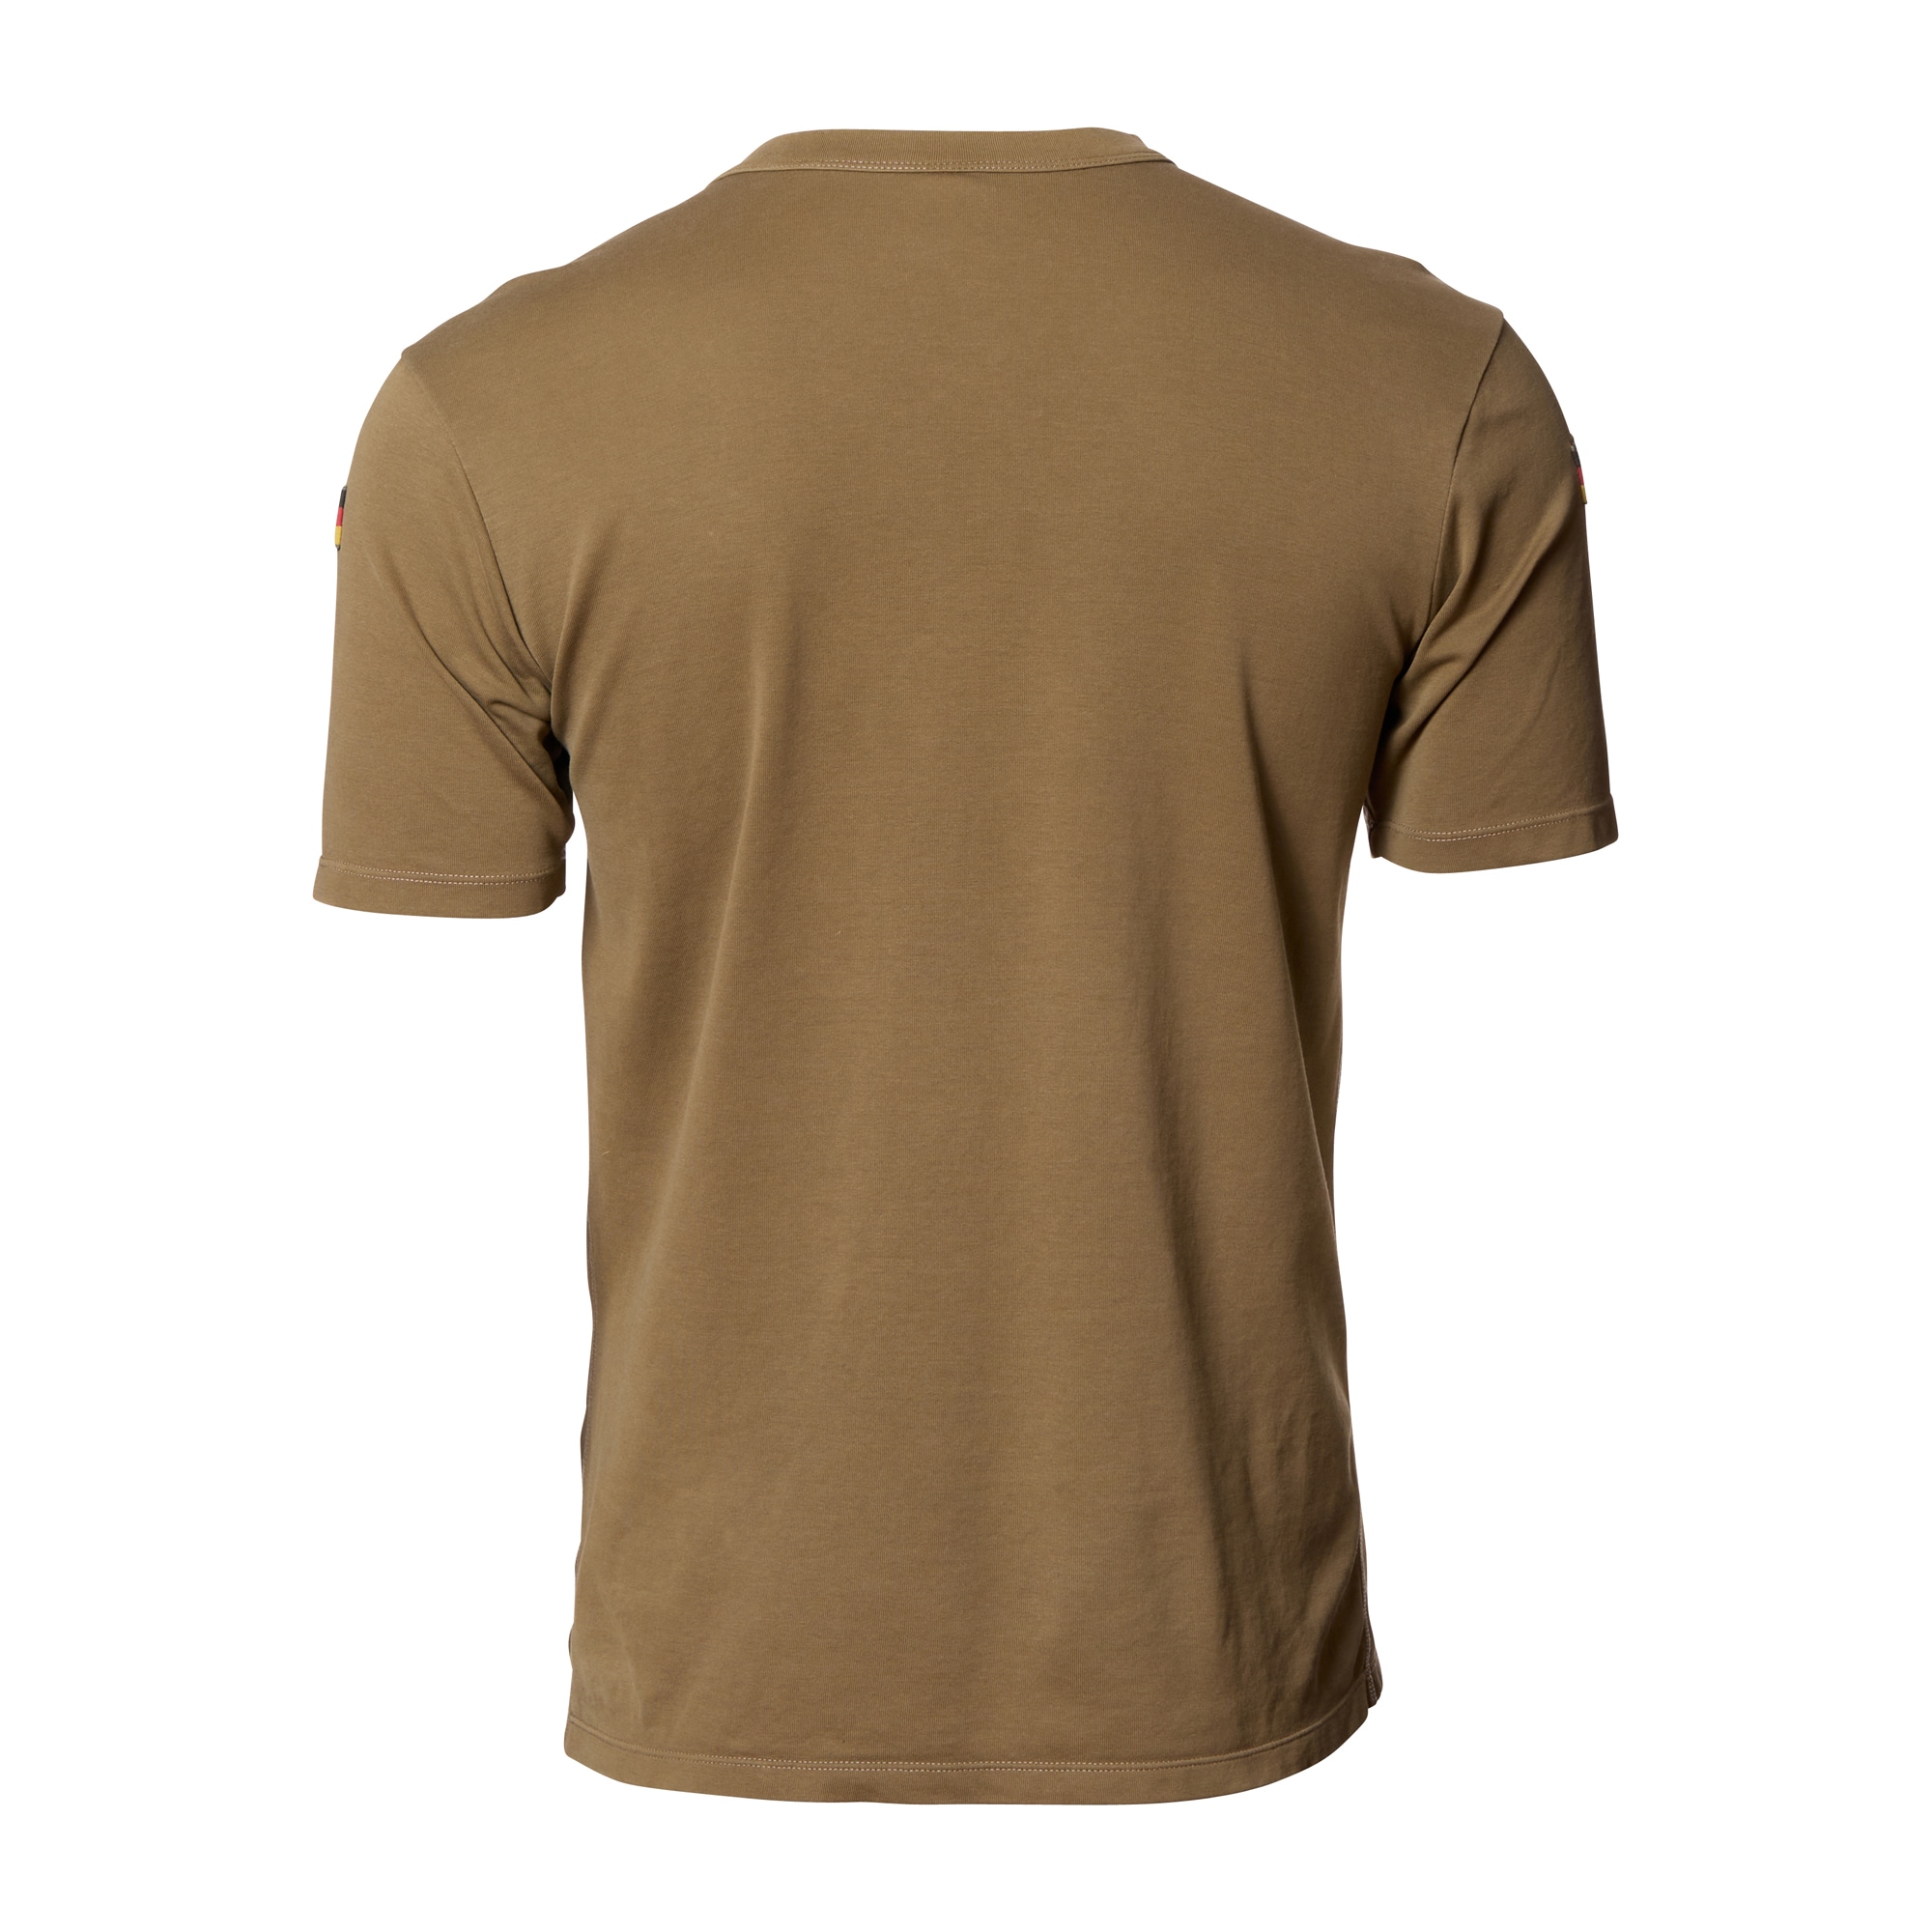 Purchase the BW Tropical T-Shirt Like New beige by ASMC